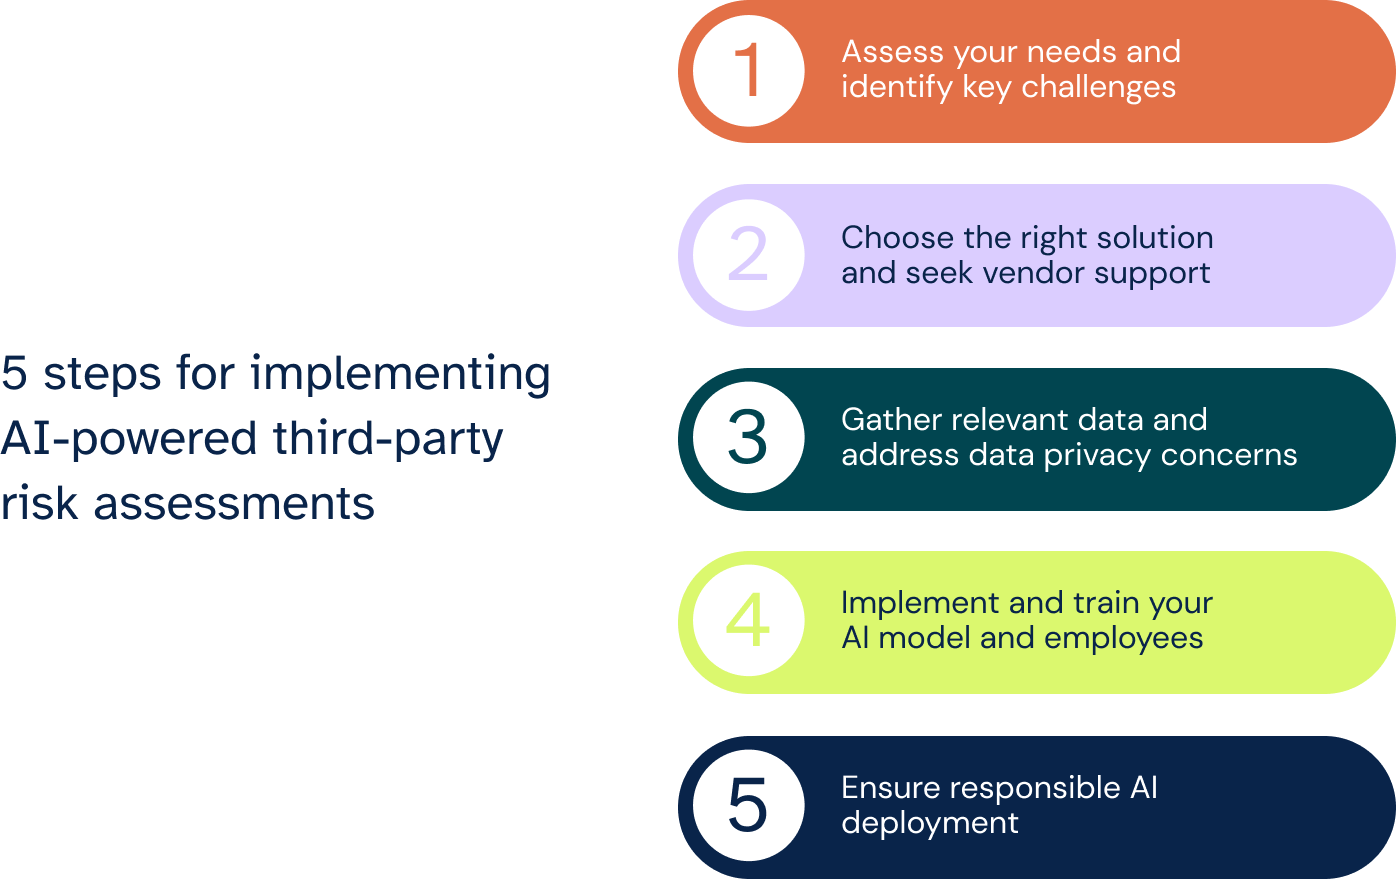 5 steps for implementing AI-powered third-party risk assessments